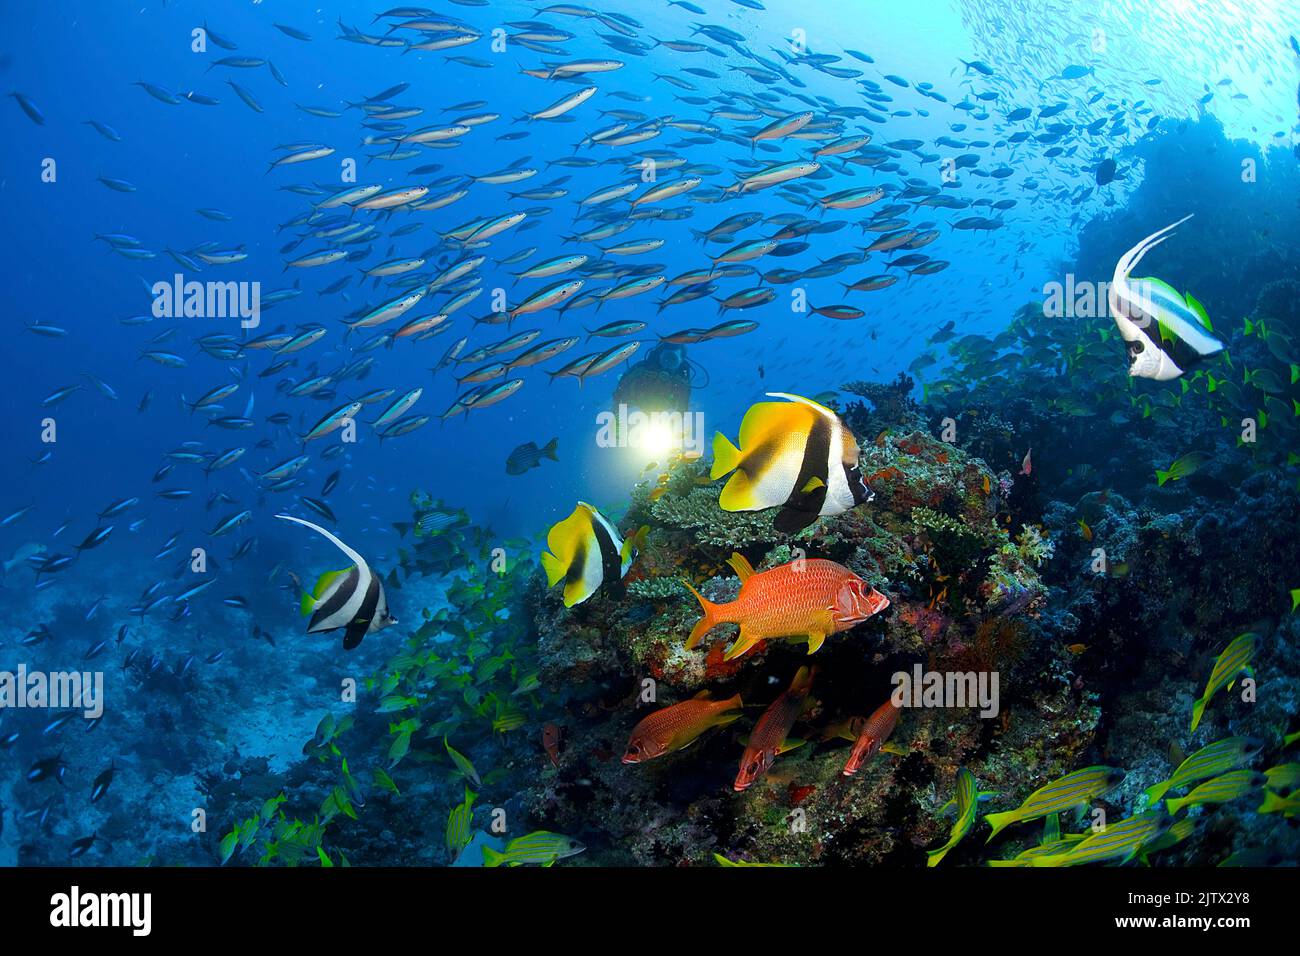 Scuba diver in a maldivian coral reef with colourful coral fishes, Maldives, Indian Ocean, Asia Stock Photo